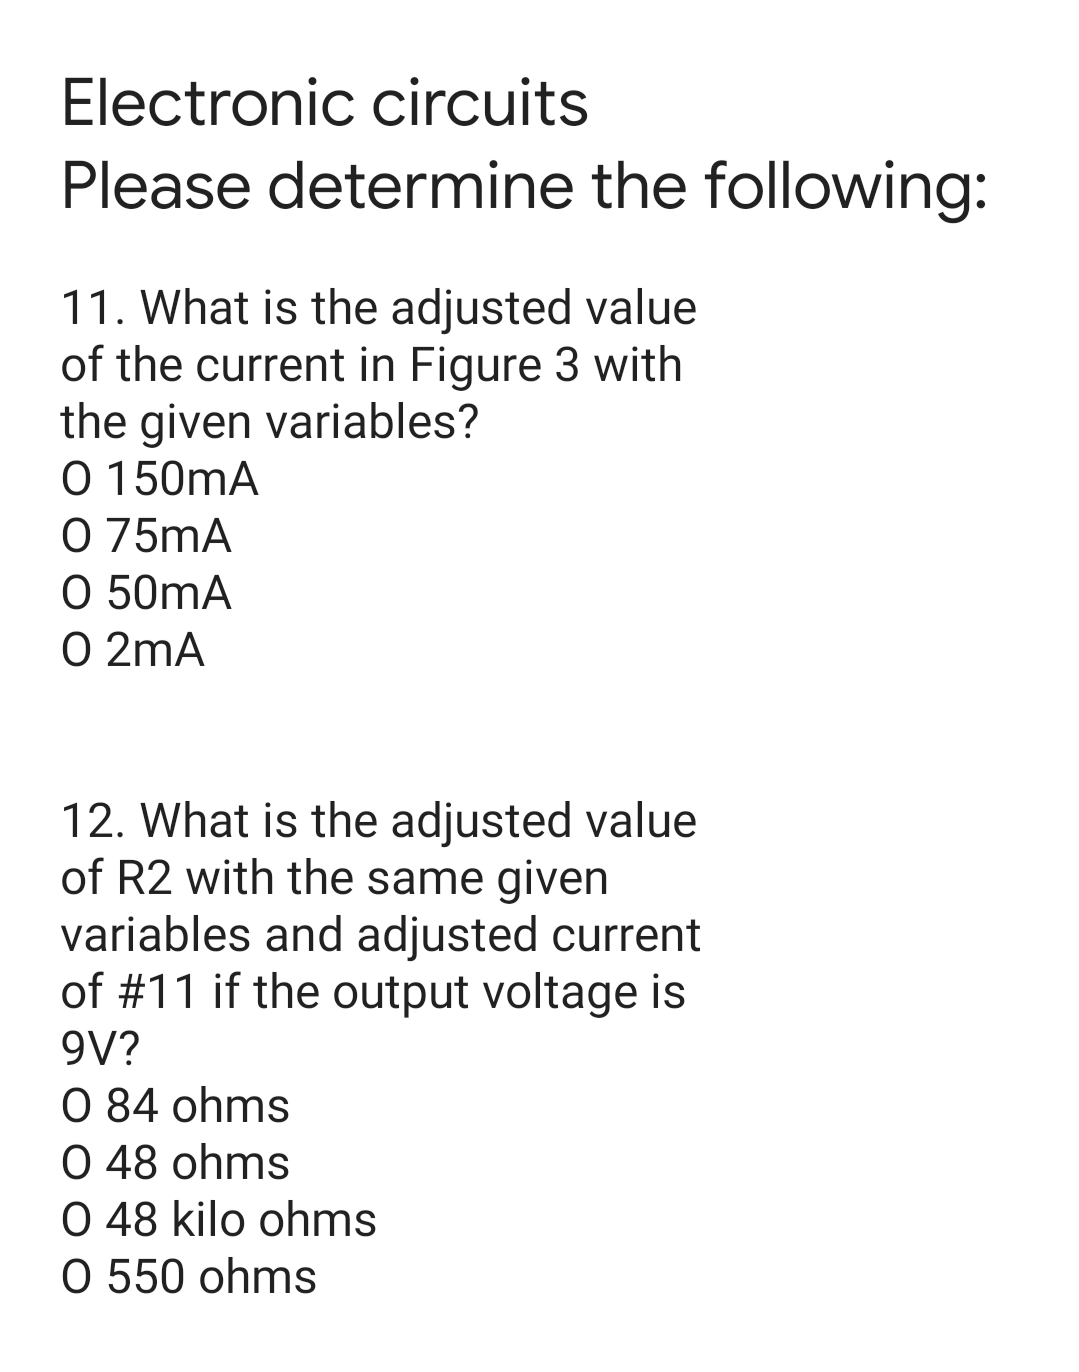 Electronic circuits
Please determine the following:
11. What is the adjusted value
of the current in Figure 3 with
the given variables?
O 150mA
O 75mA
O 50mA
O 2mA
12. What is the adjusted value
of R2 with the same given
variables and adjusted current
of #11 if the output voltage is
9V?
0 84 ohms
O 48 ohms
O 48 kilo ohms
O 550 ohms
